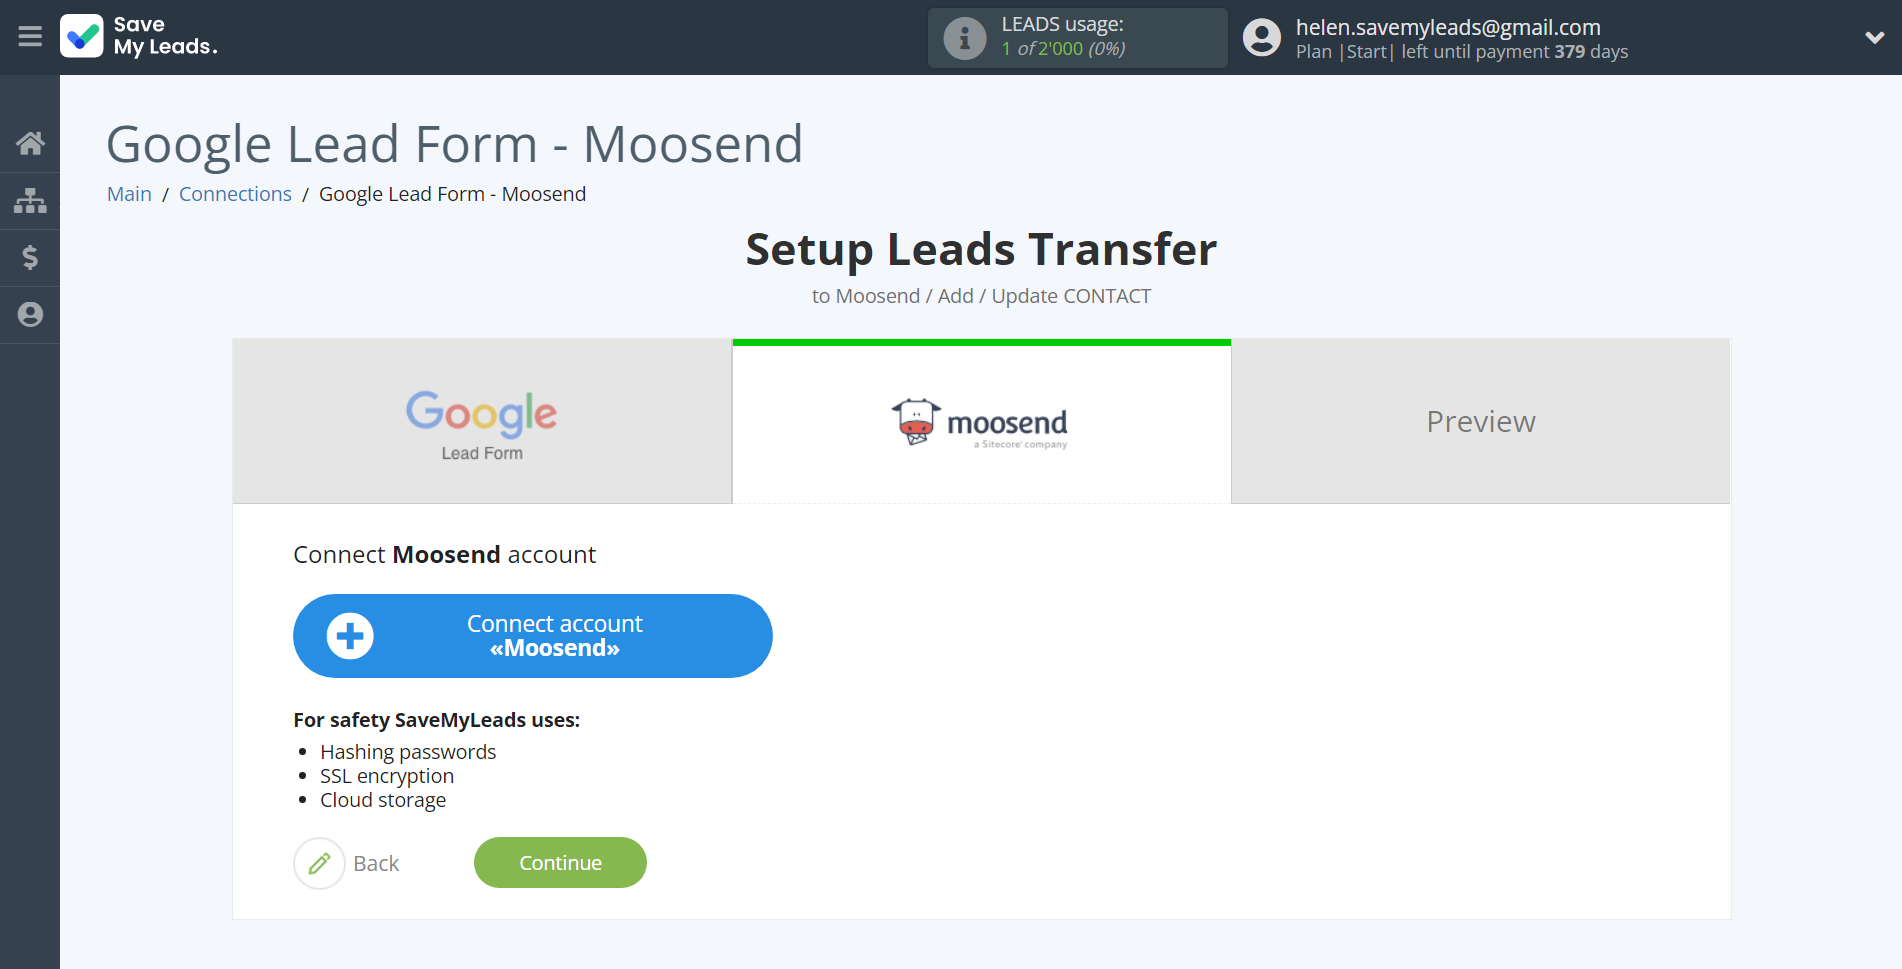 How to Connect Google Lead Form with Moosend | Data Destination account connection